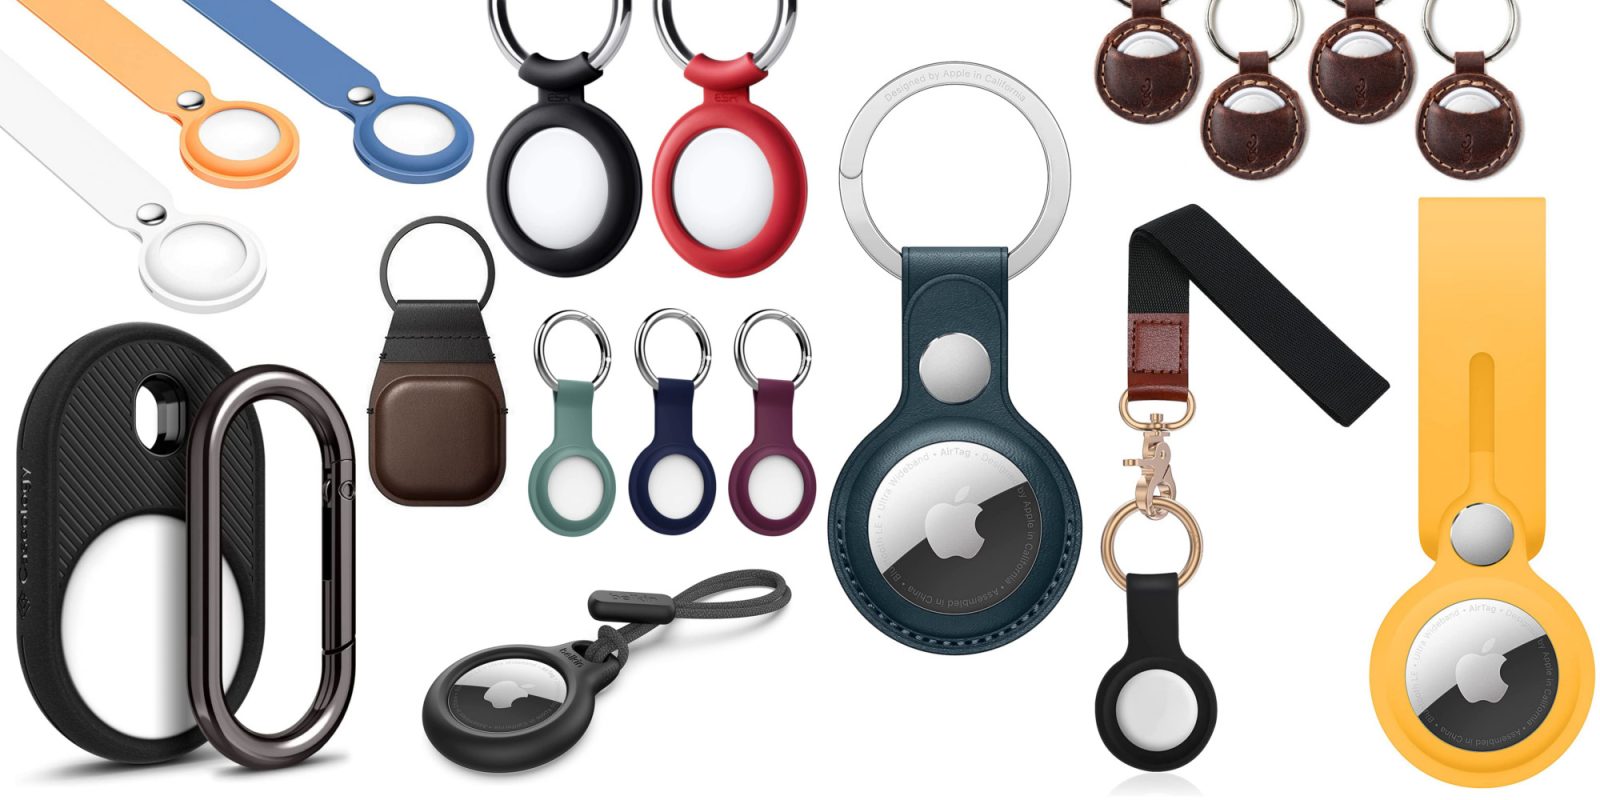 Best AirTag keychains, AirTags cases, covers, straps, and more